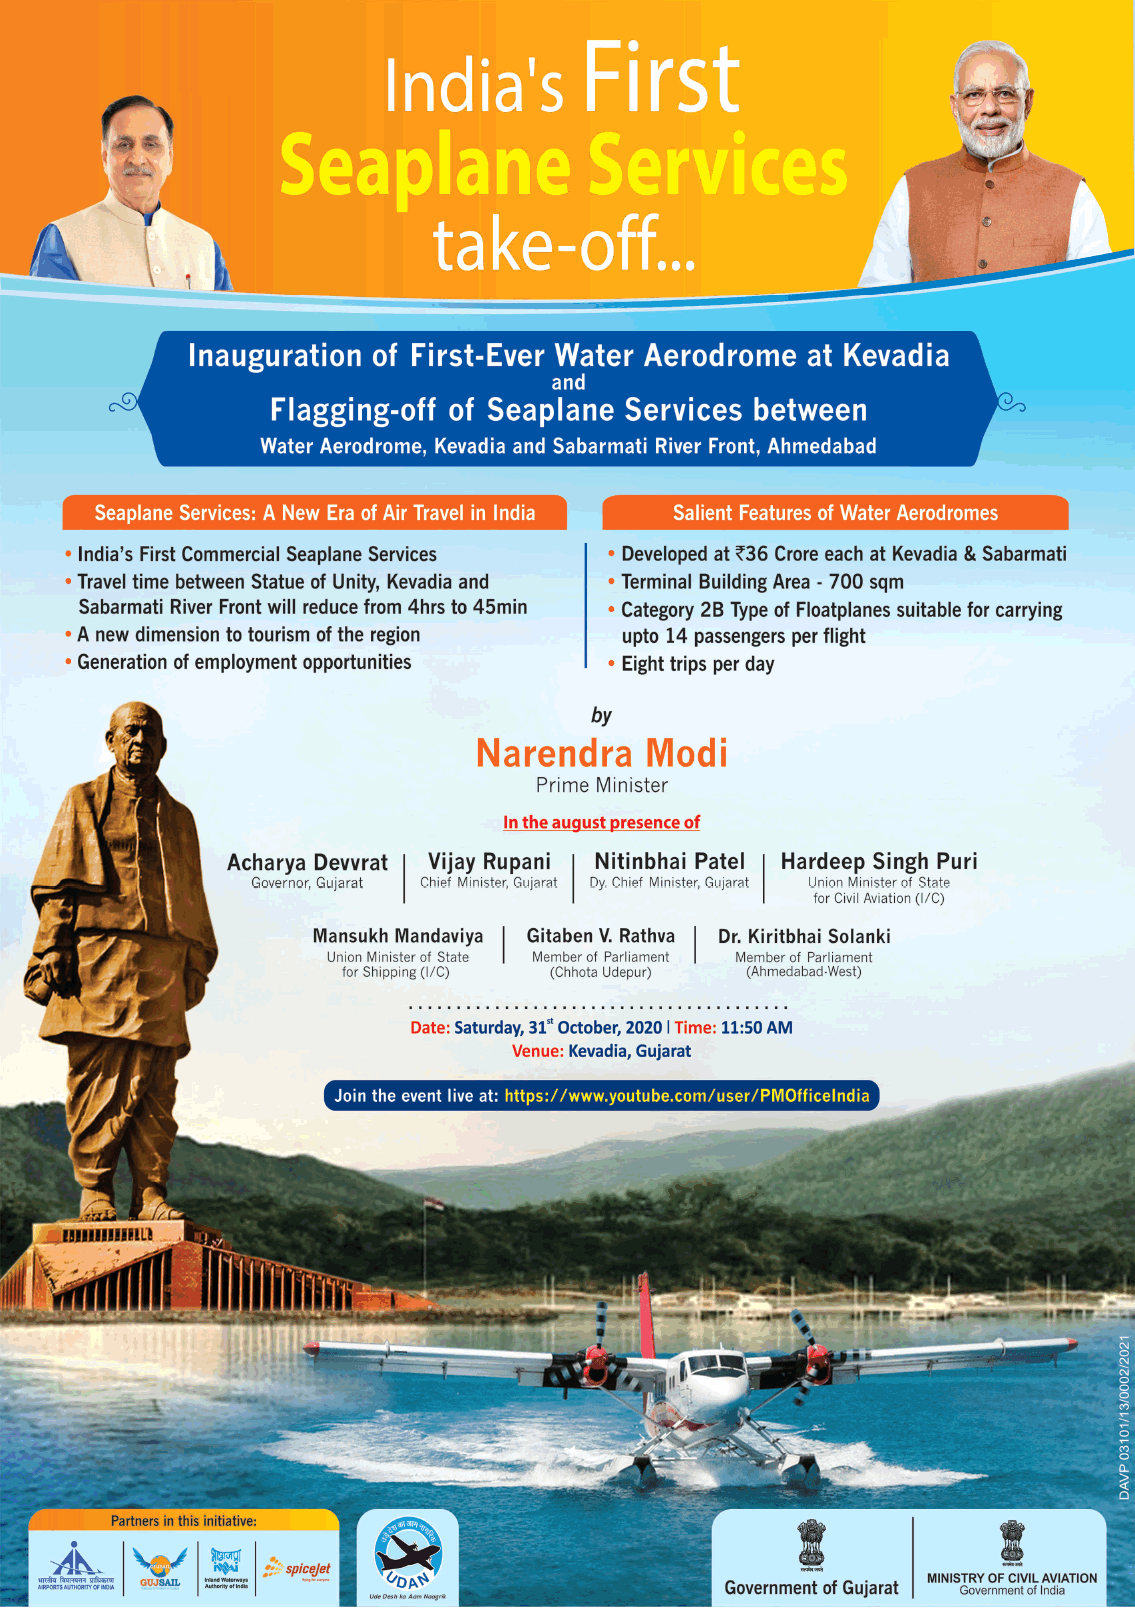 inauguration-of-first-ever-water-aerodrome-at-kevadia-and-flagging-off-of-seaplane-services-ad-toi-mumbai-31-10-2020